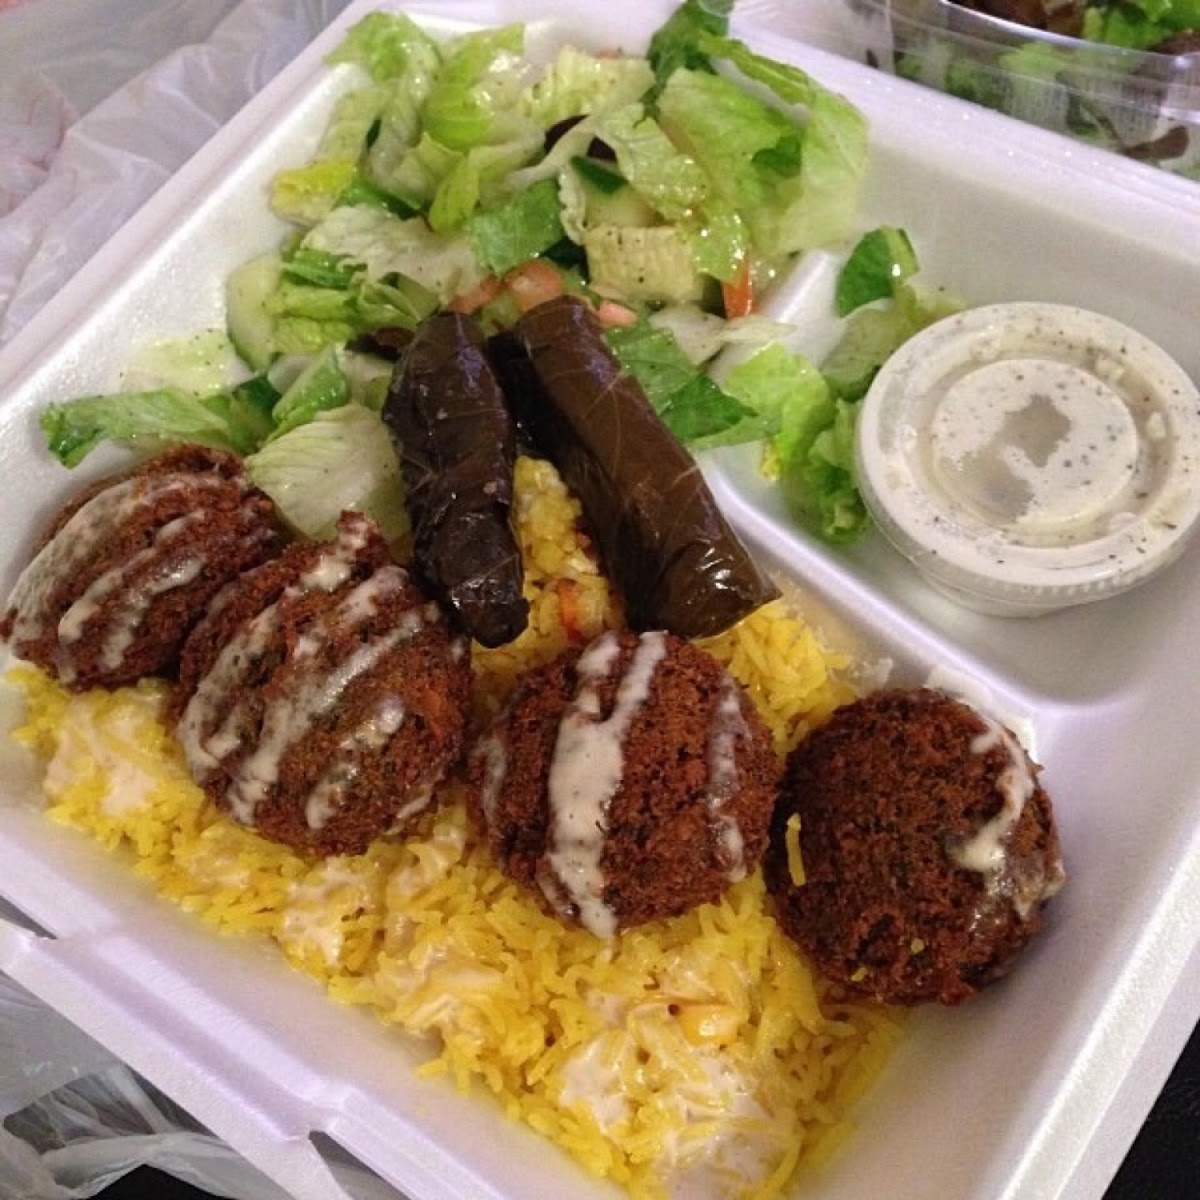 Falafel plate with a side of grape leaves. (Their sides are huge!)